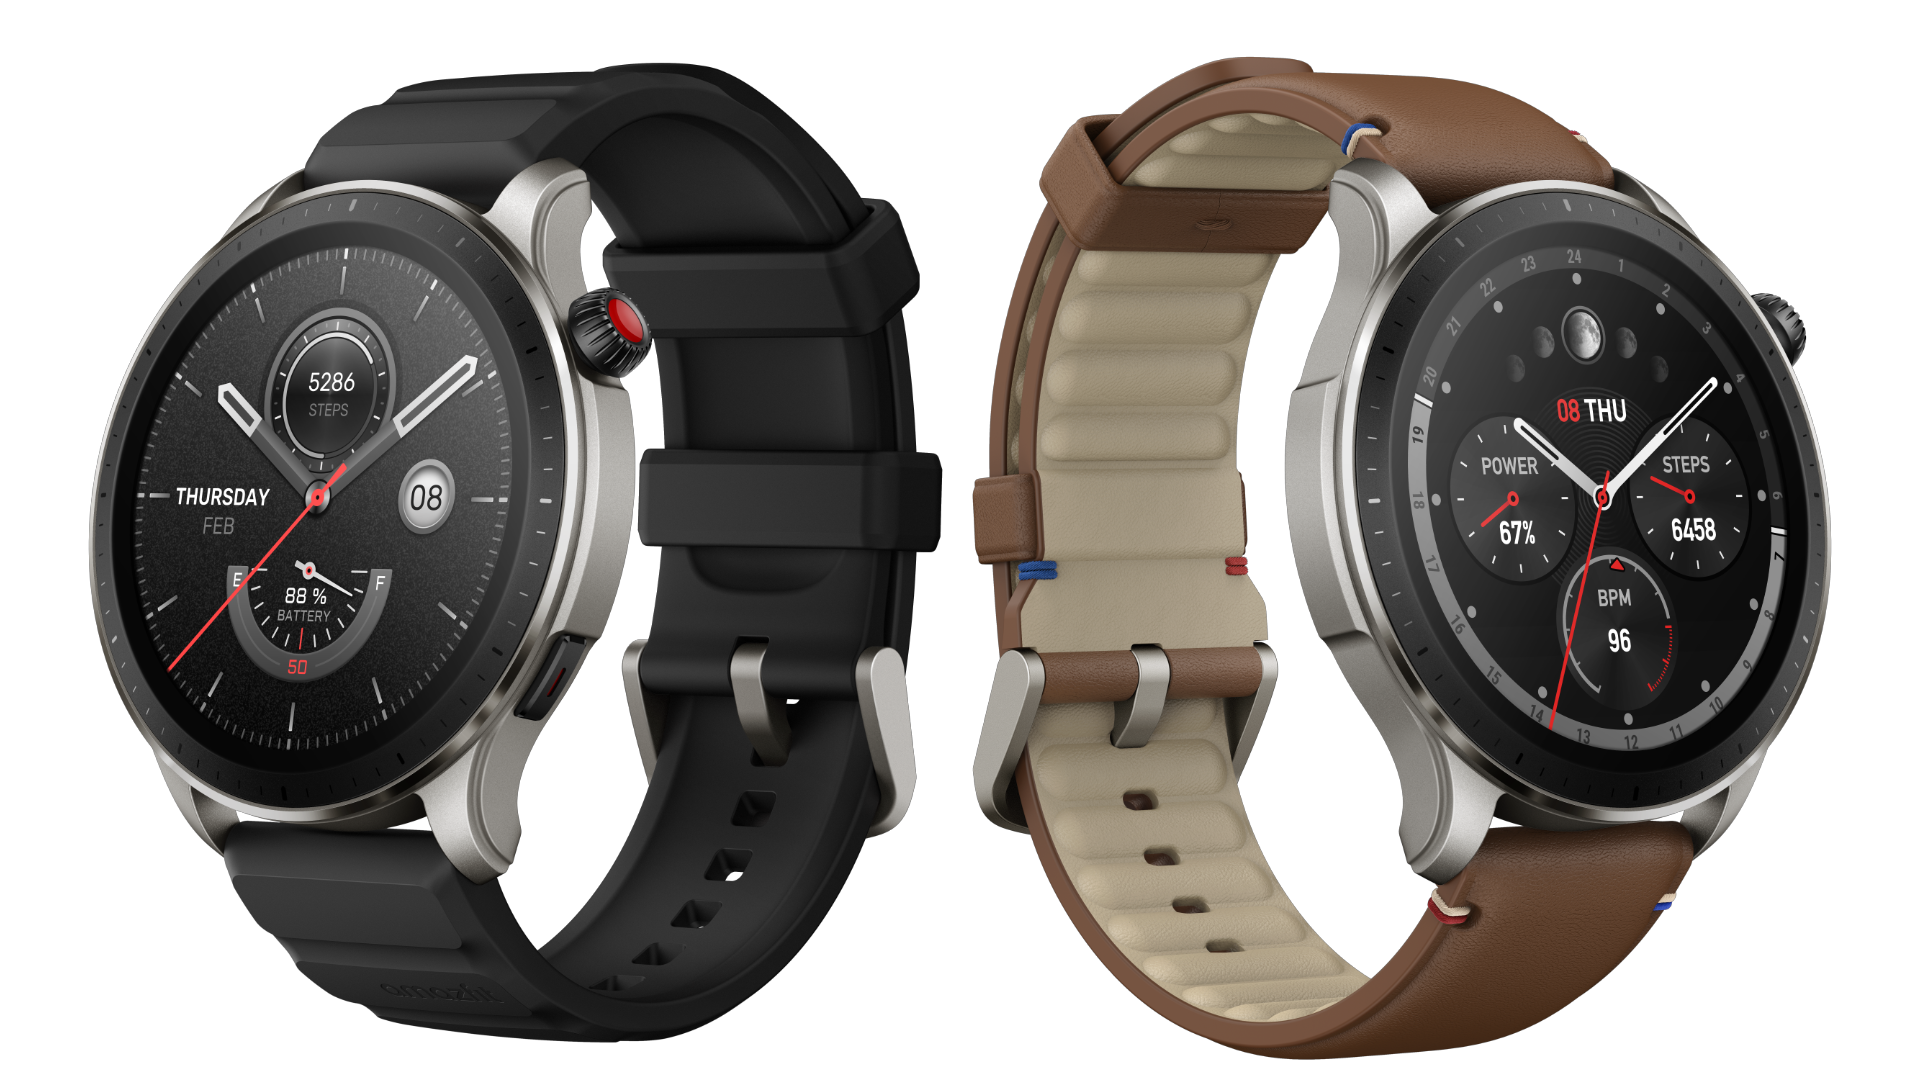 AMAZFIT INTRODUCES NEW GTR 4, GTS 4 & GTS 4 MINI SMARTWATCHES: THE